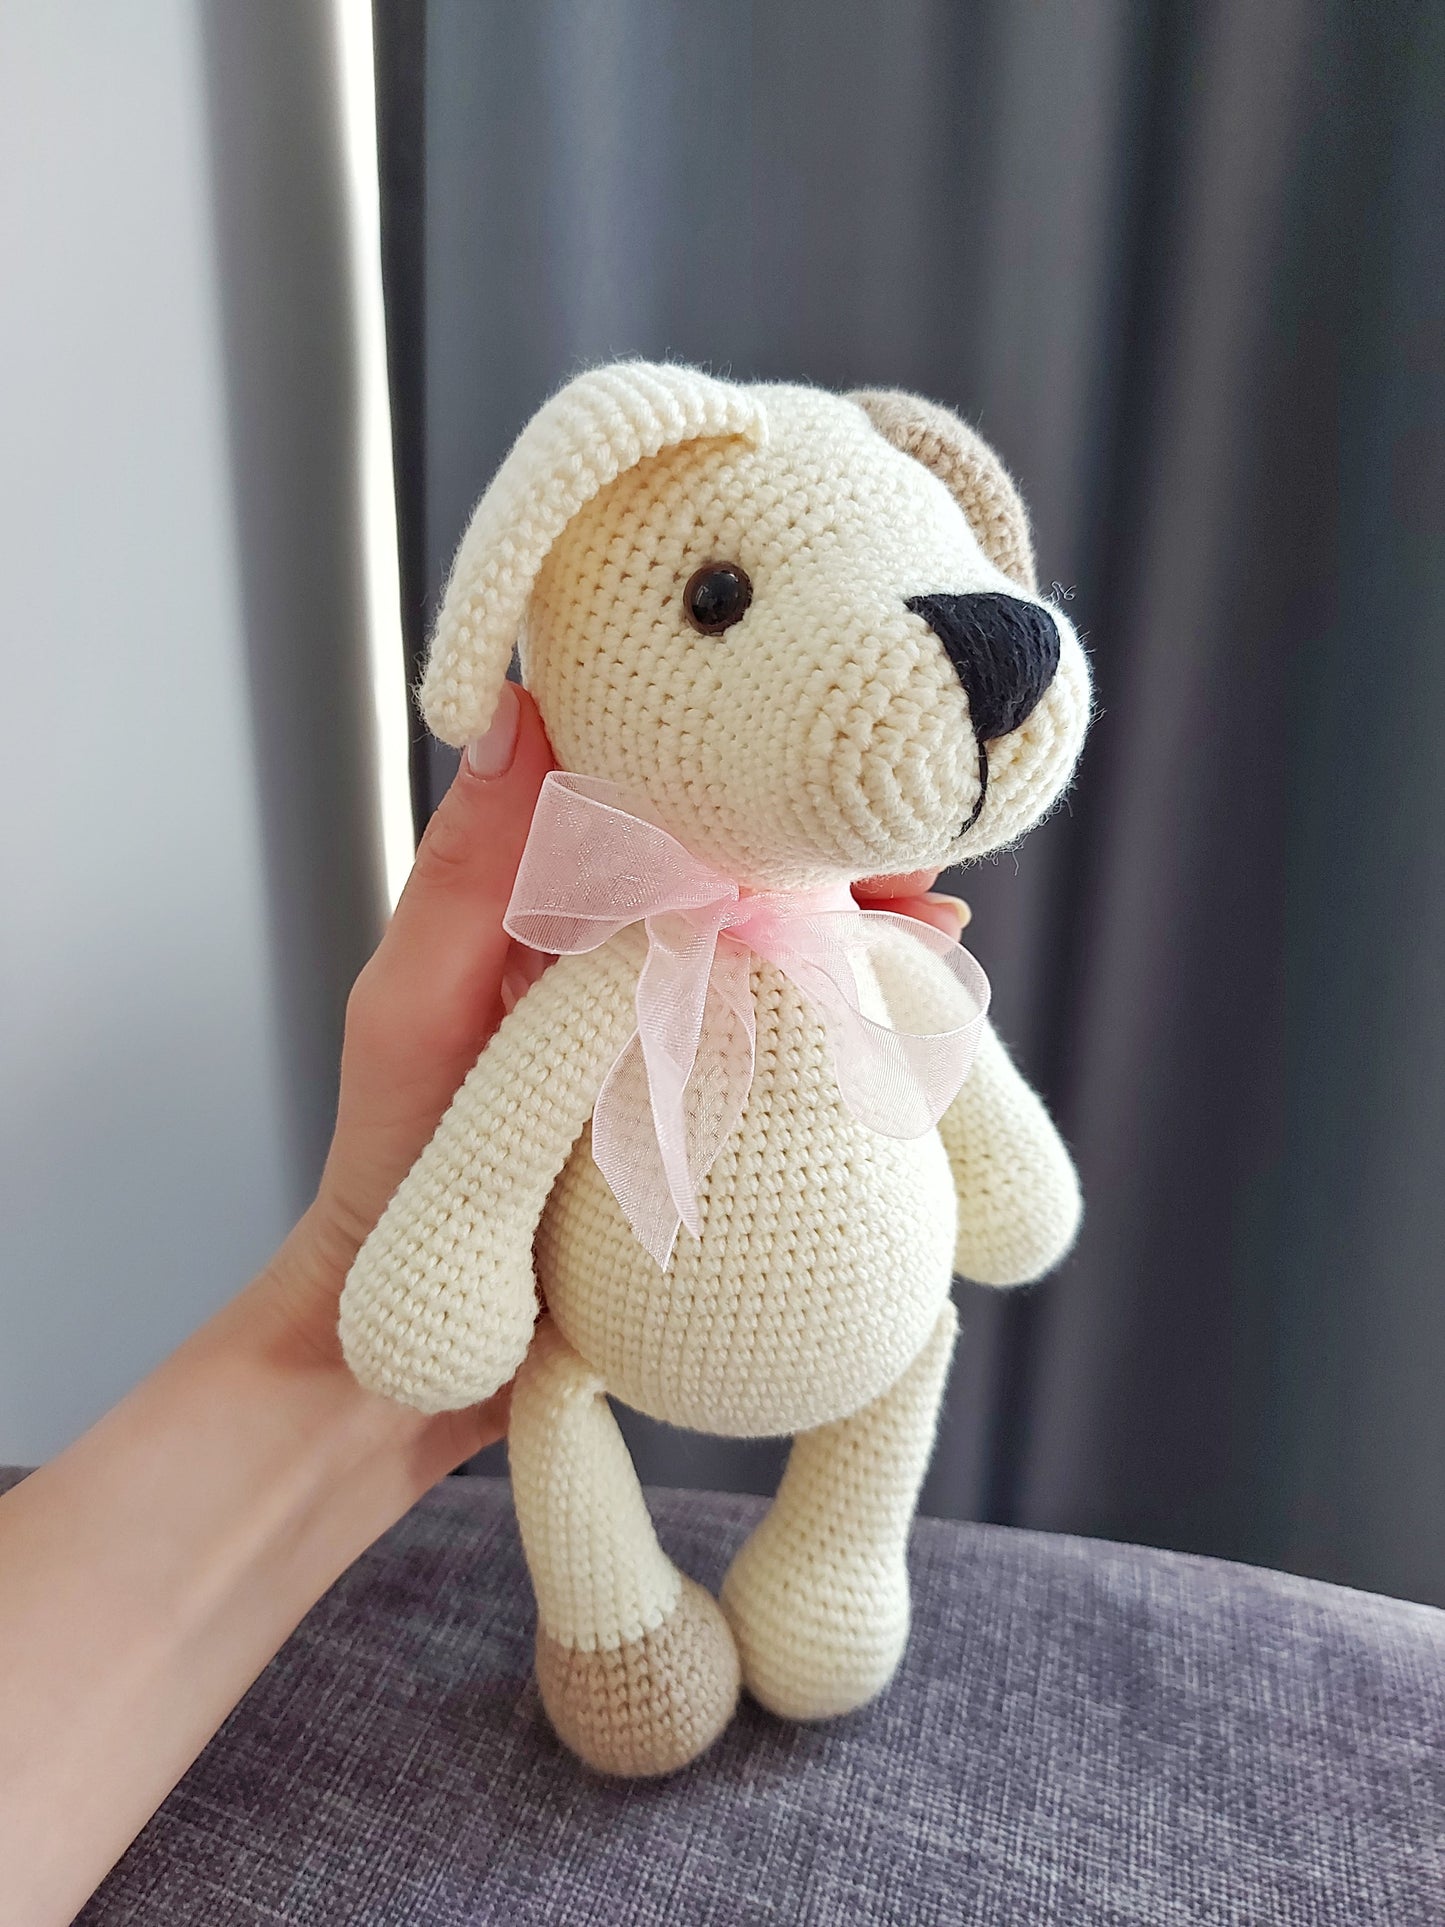 crochet puppy toy pattern, handmade dog pattern, amigurumi puppy doll, soft stuffed doggy, gift for puppy lover, gift for children girl